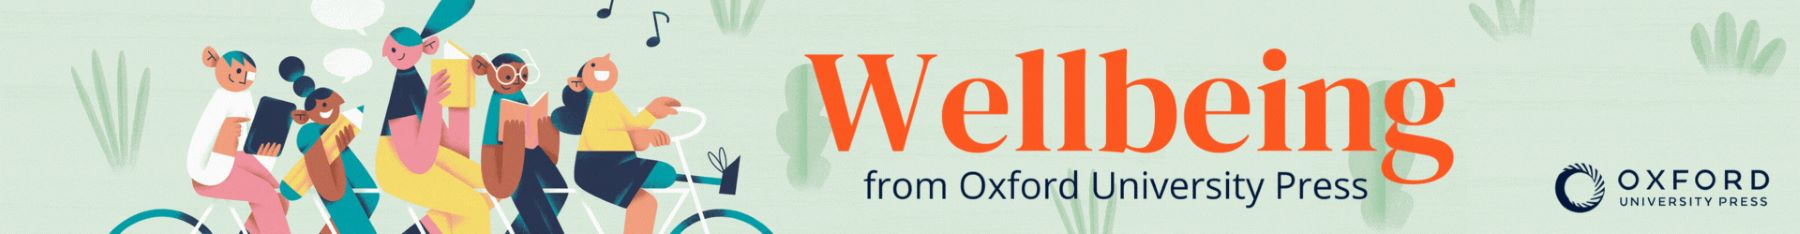 OUP Wellbeing banner